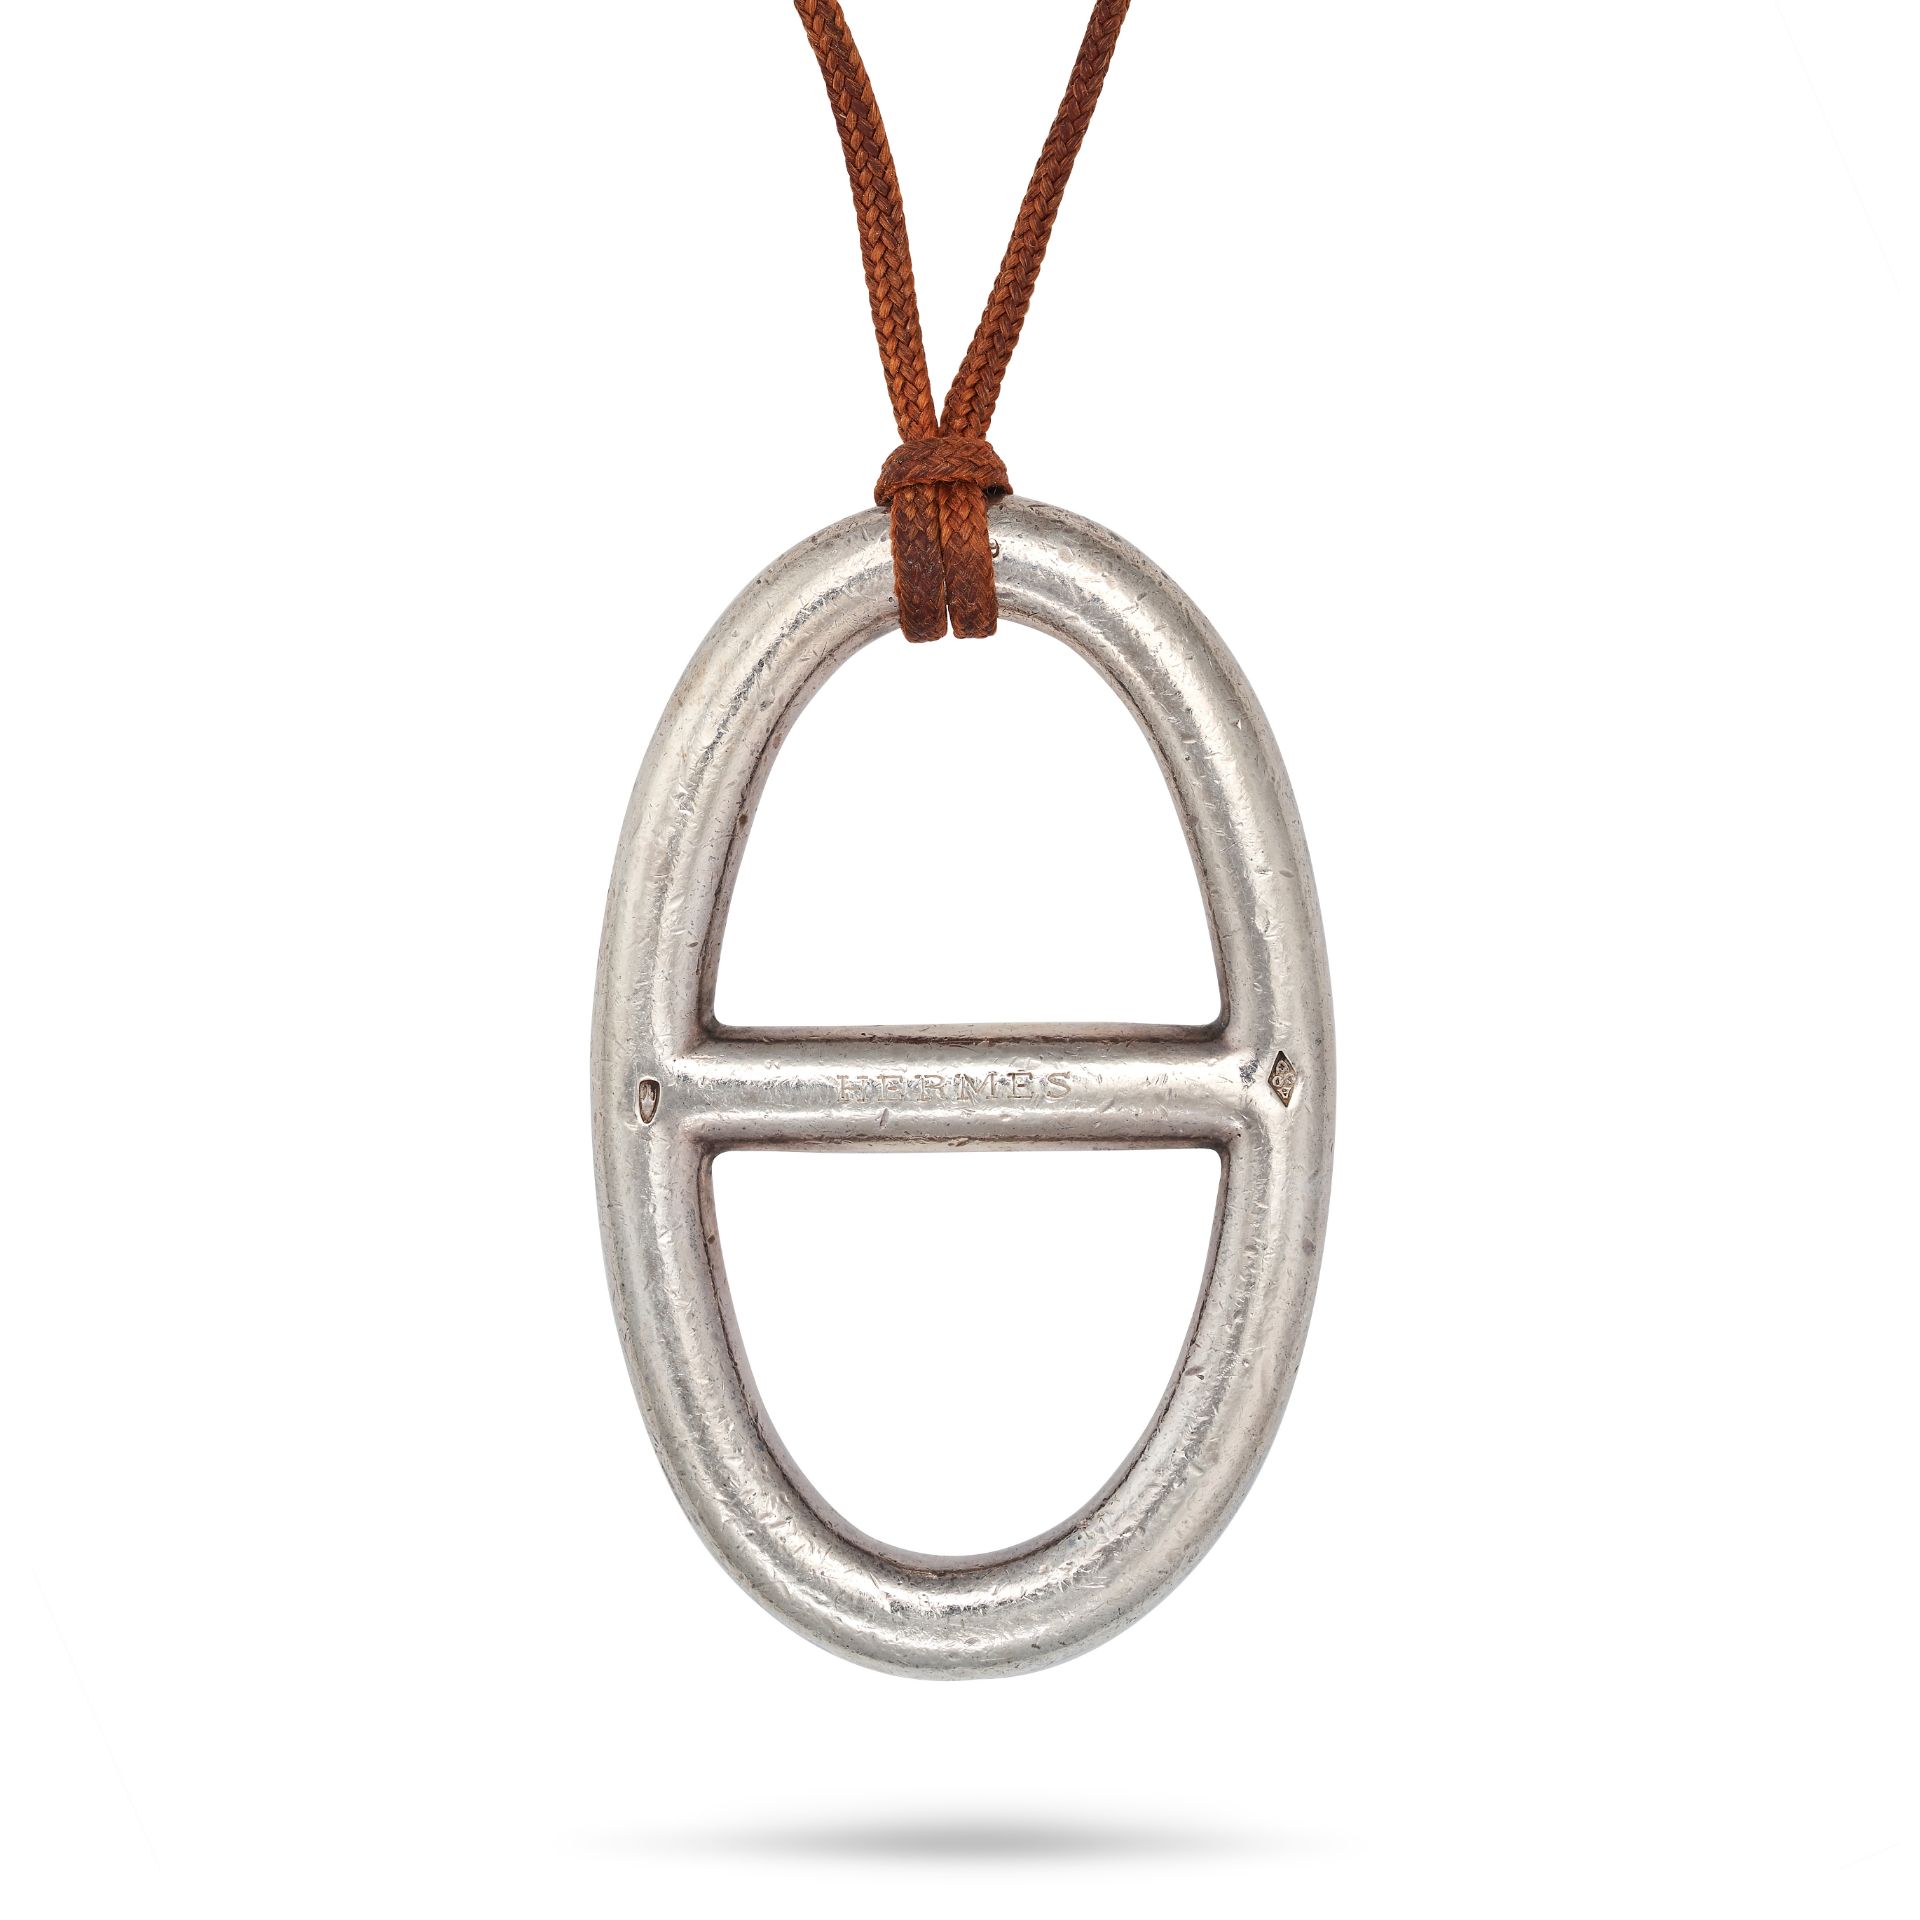 HERMES, A CHAINE D'ANCRE PENDANT CORD NECKLACE, pendent in sterling silver, signed 'Hermes', 4.5c... - Image 2 of 3